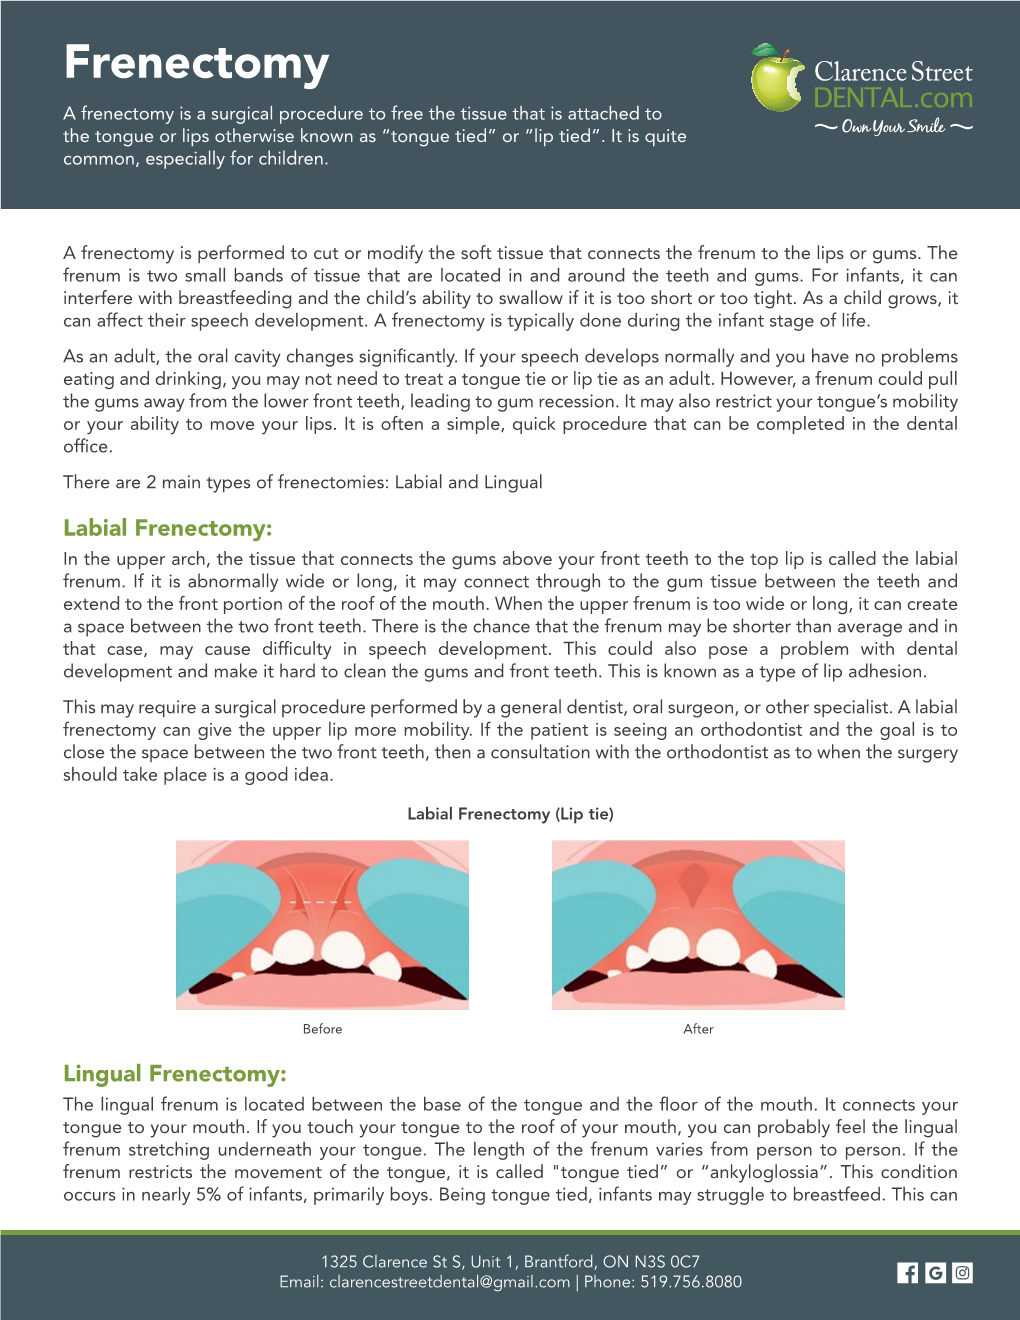 Frenectomy a Frenectomy Is a Surgical Procedure to Free the Tissue That Is Attached to the Tongue Or Lips Otherwise Known As “Tongue Tied” Or “Lip Tied”